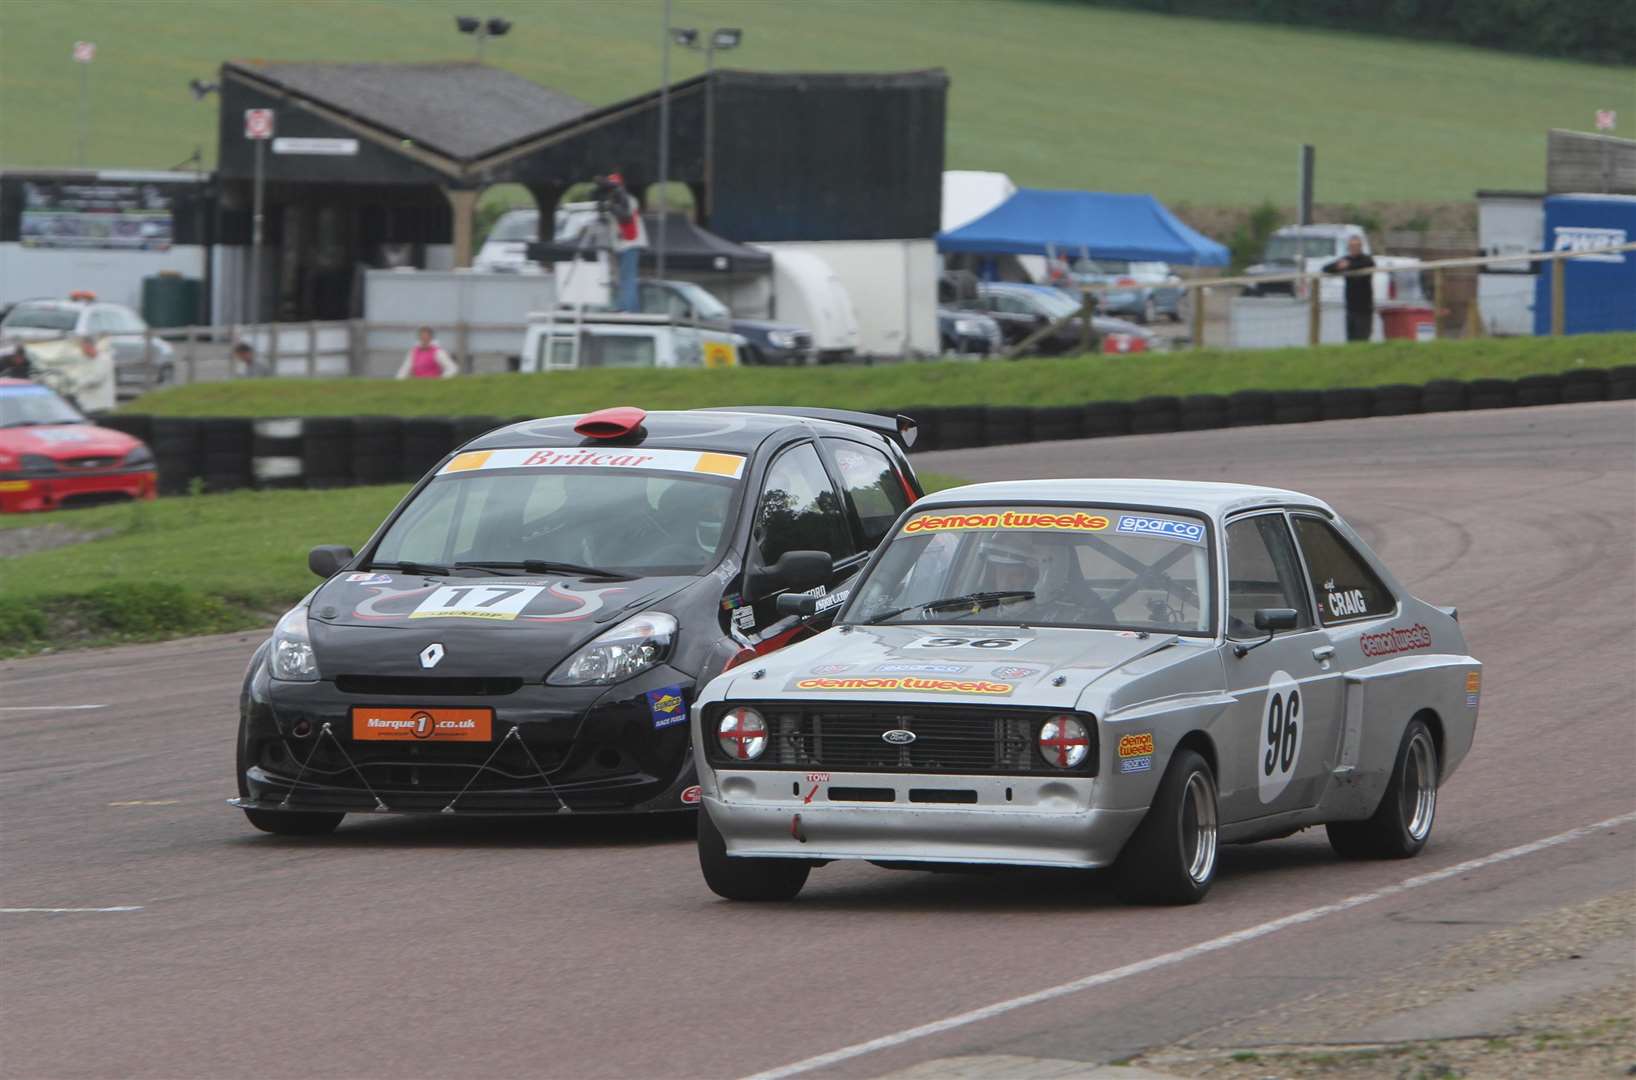 Elham area residents Nigel Craig (right) and Tony Skelton battle it out at Lydden in 2012. The landmark ‘Y’ roof of the former scrutineering bay can be seen in the background. Picture: Kerry Dunlop